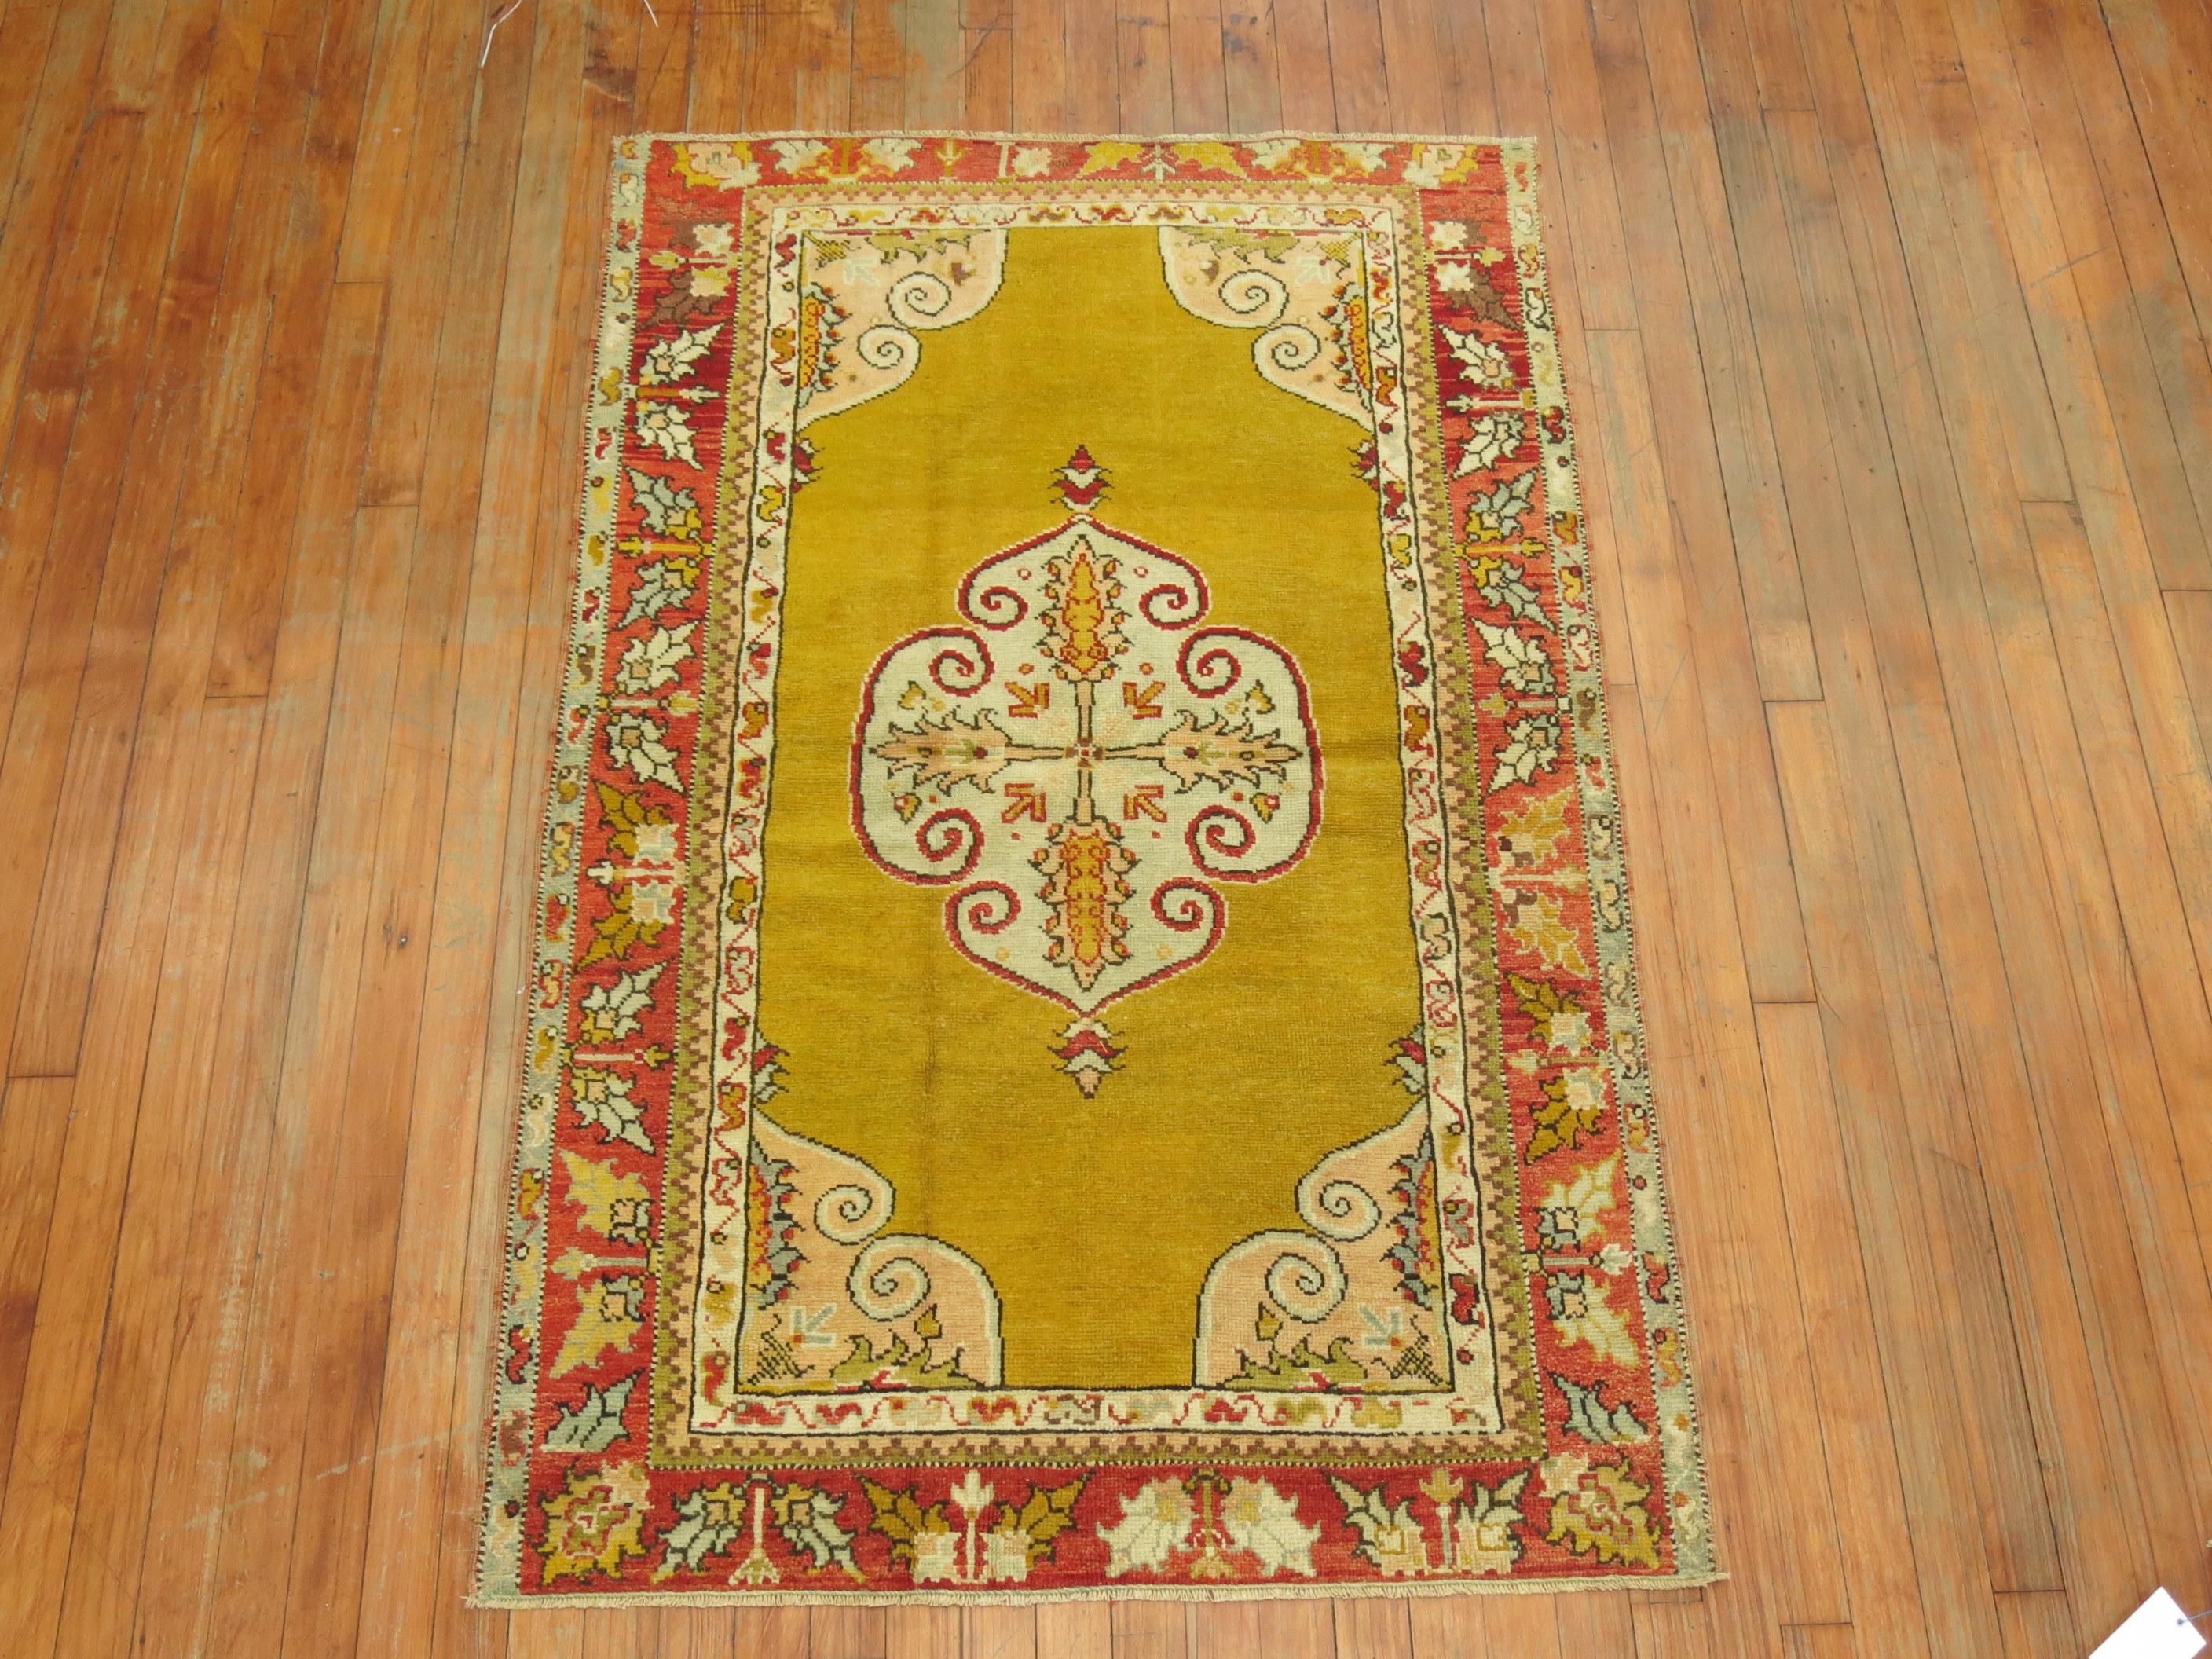 Highly decorative Turkish rug with a Classic medallion design on a mustard yellow ground.